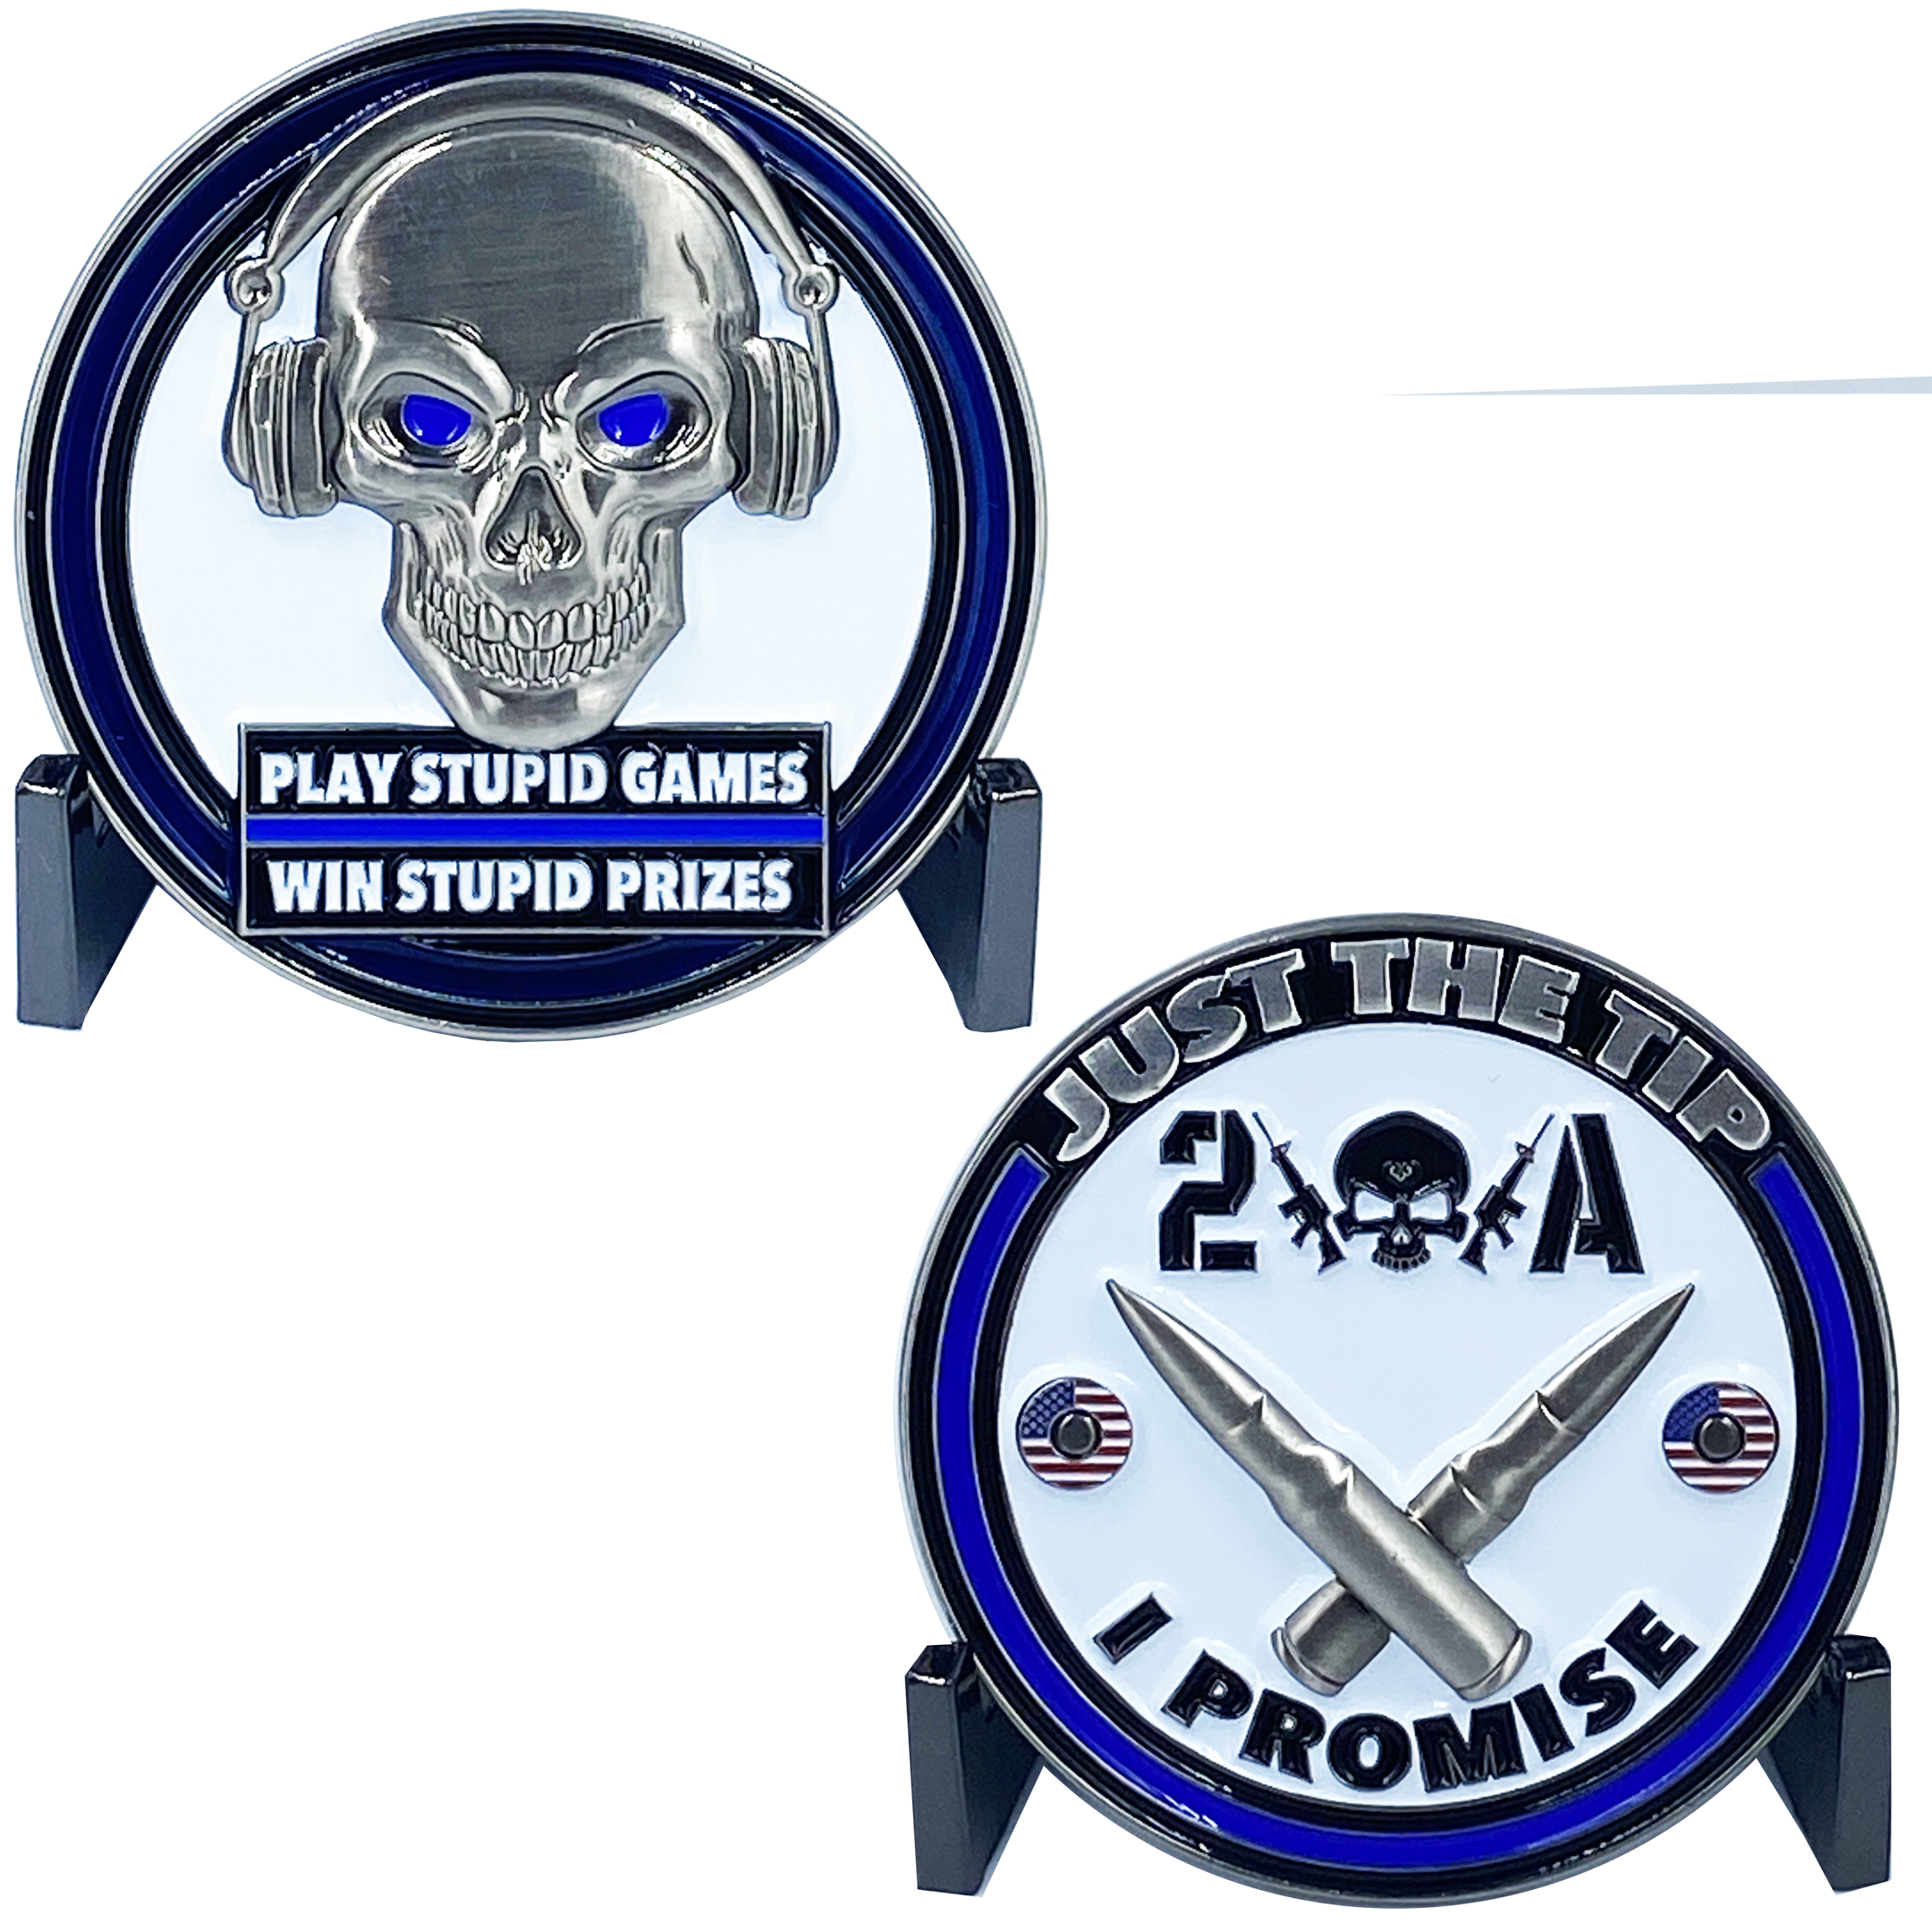 DL5-04 Just the Tip I Promise Play Stupid Games Win Stupid Prizes 2A Firearms Instructor Police Military 2A Thin Blue Line Challenge Coin